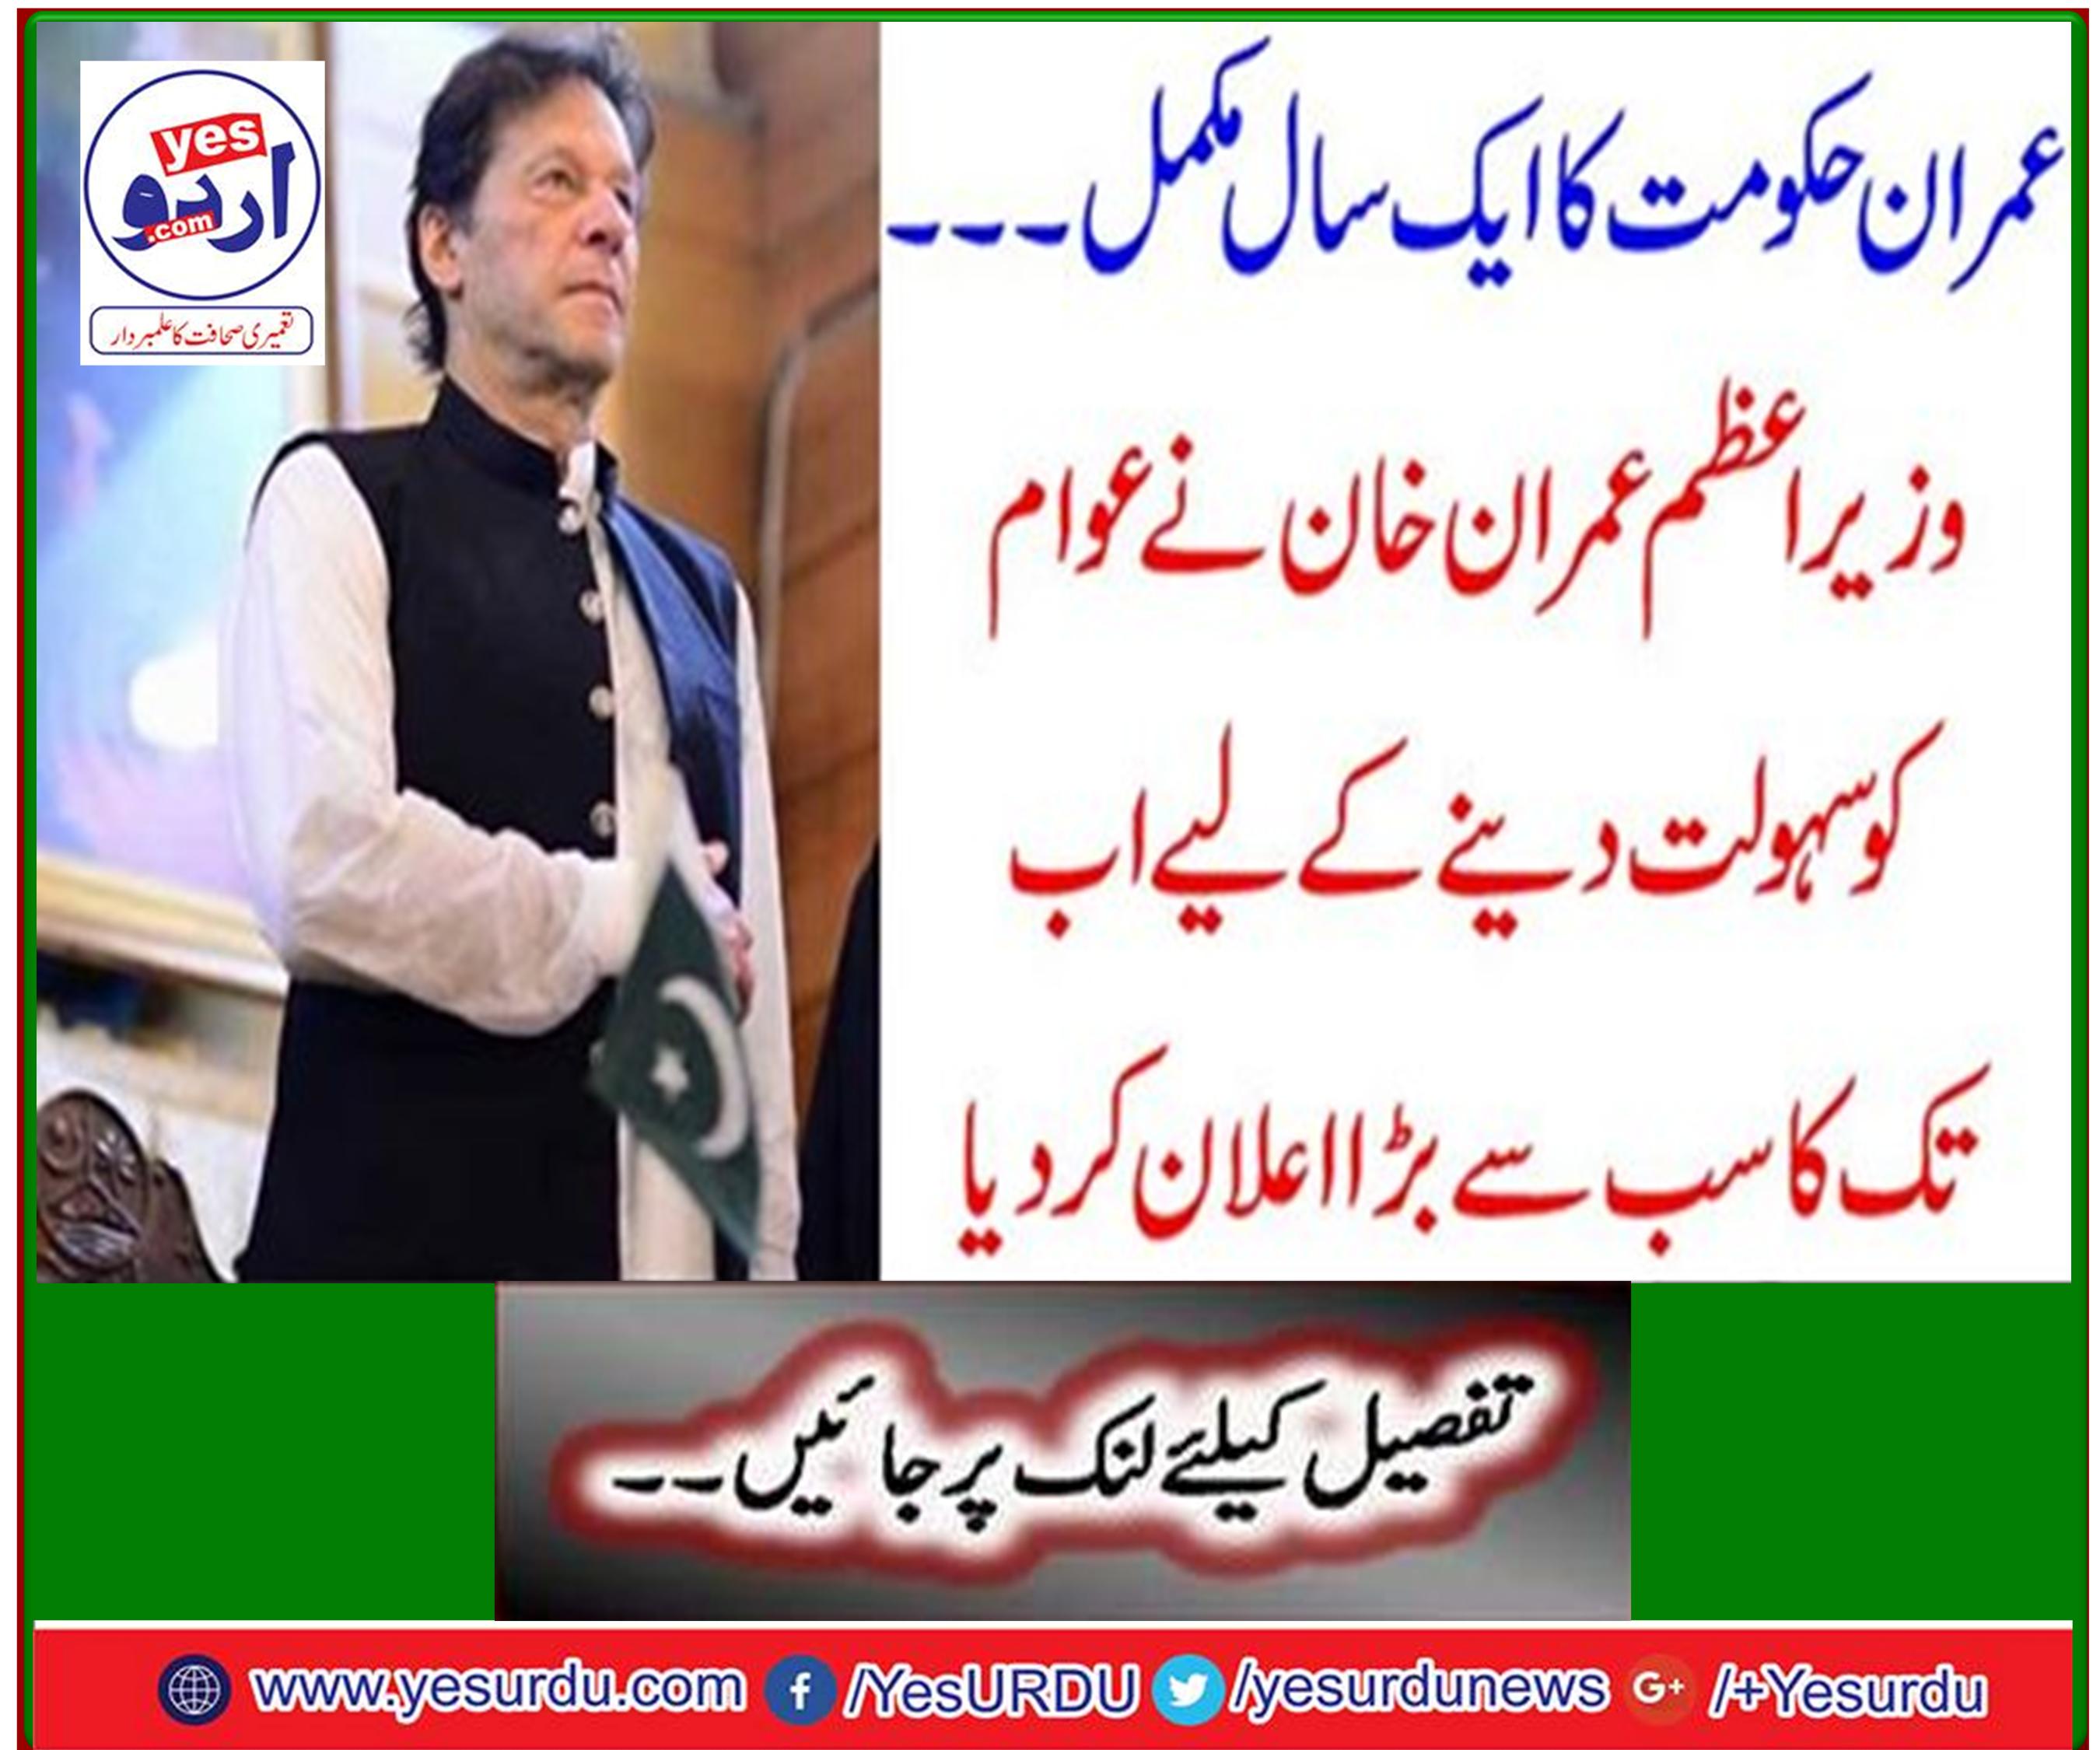 Prime Minister Imran Khan has declared the largest ever to facilitate the people